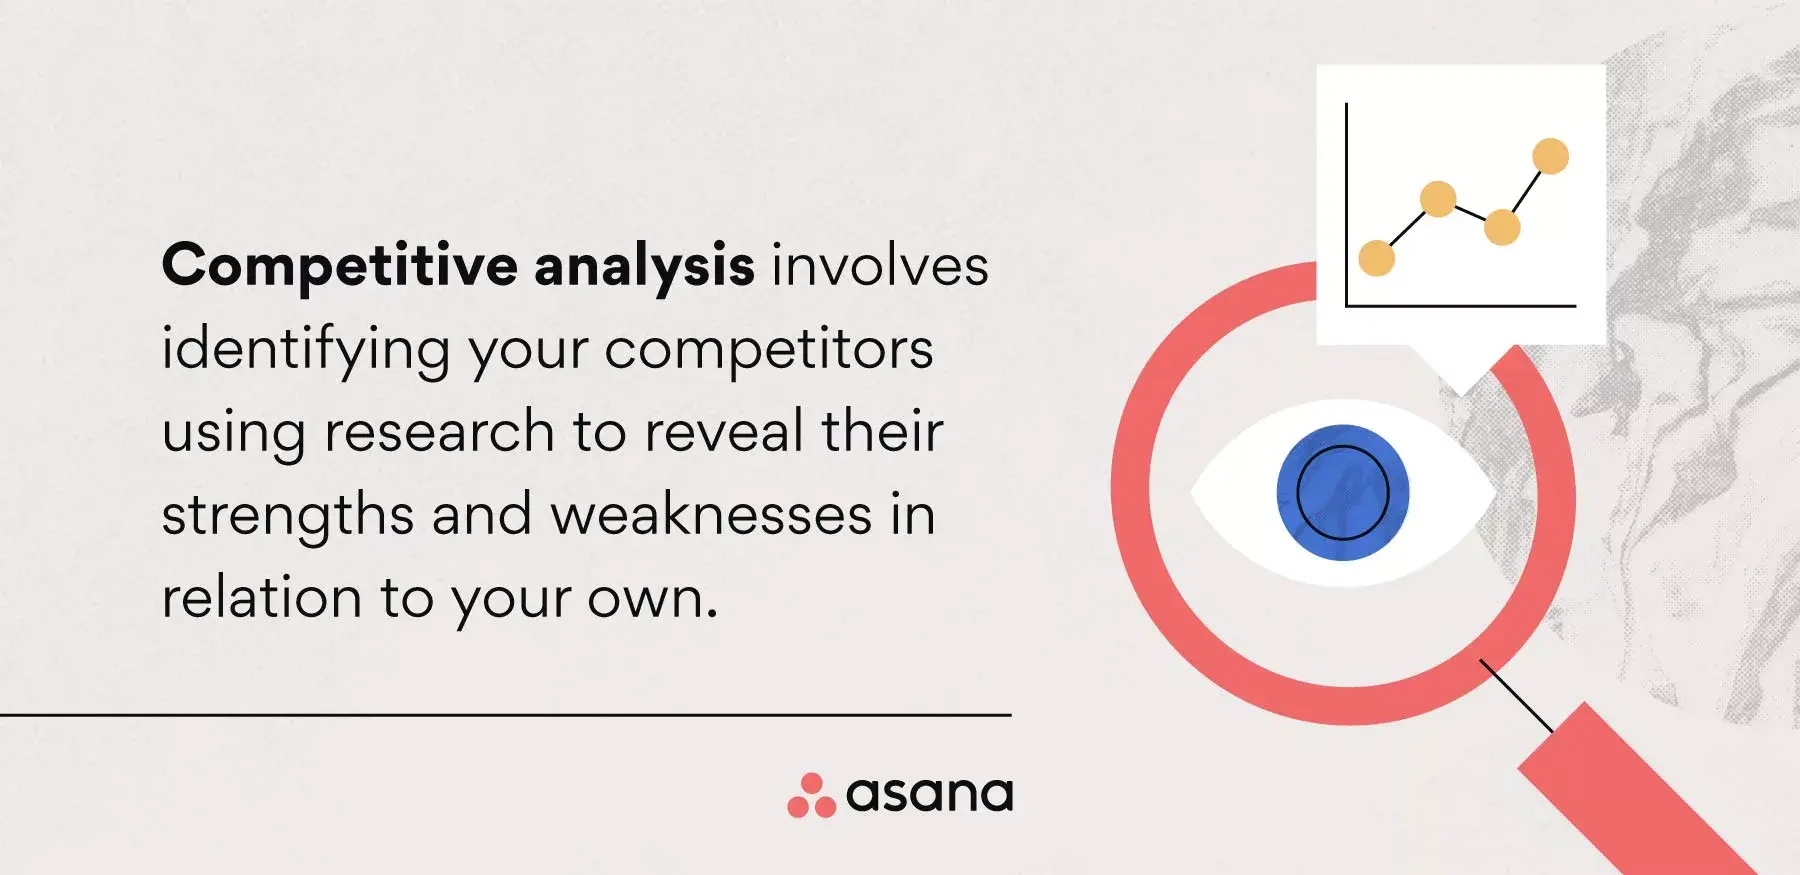 [inline illustration] What is a competitive analysis (infographic)